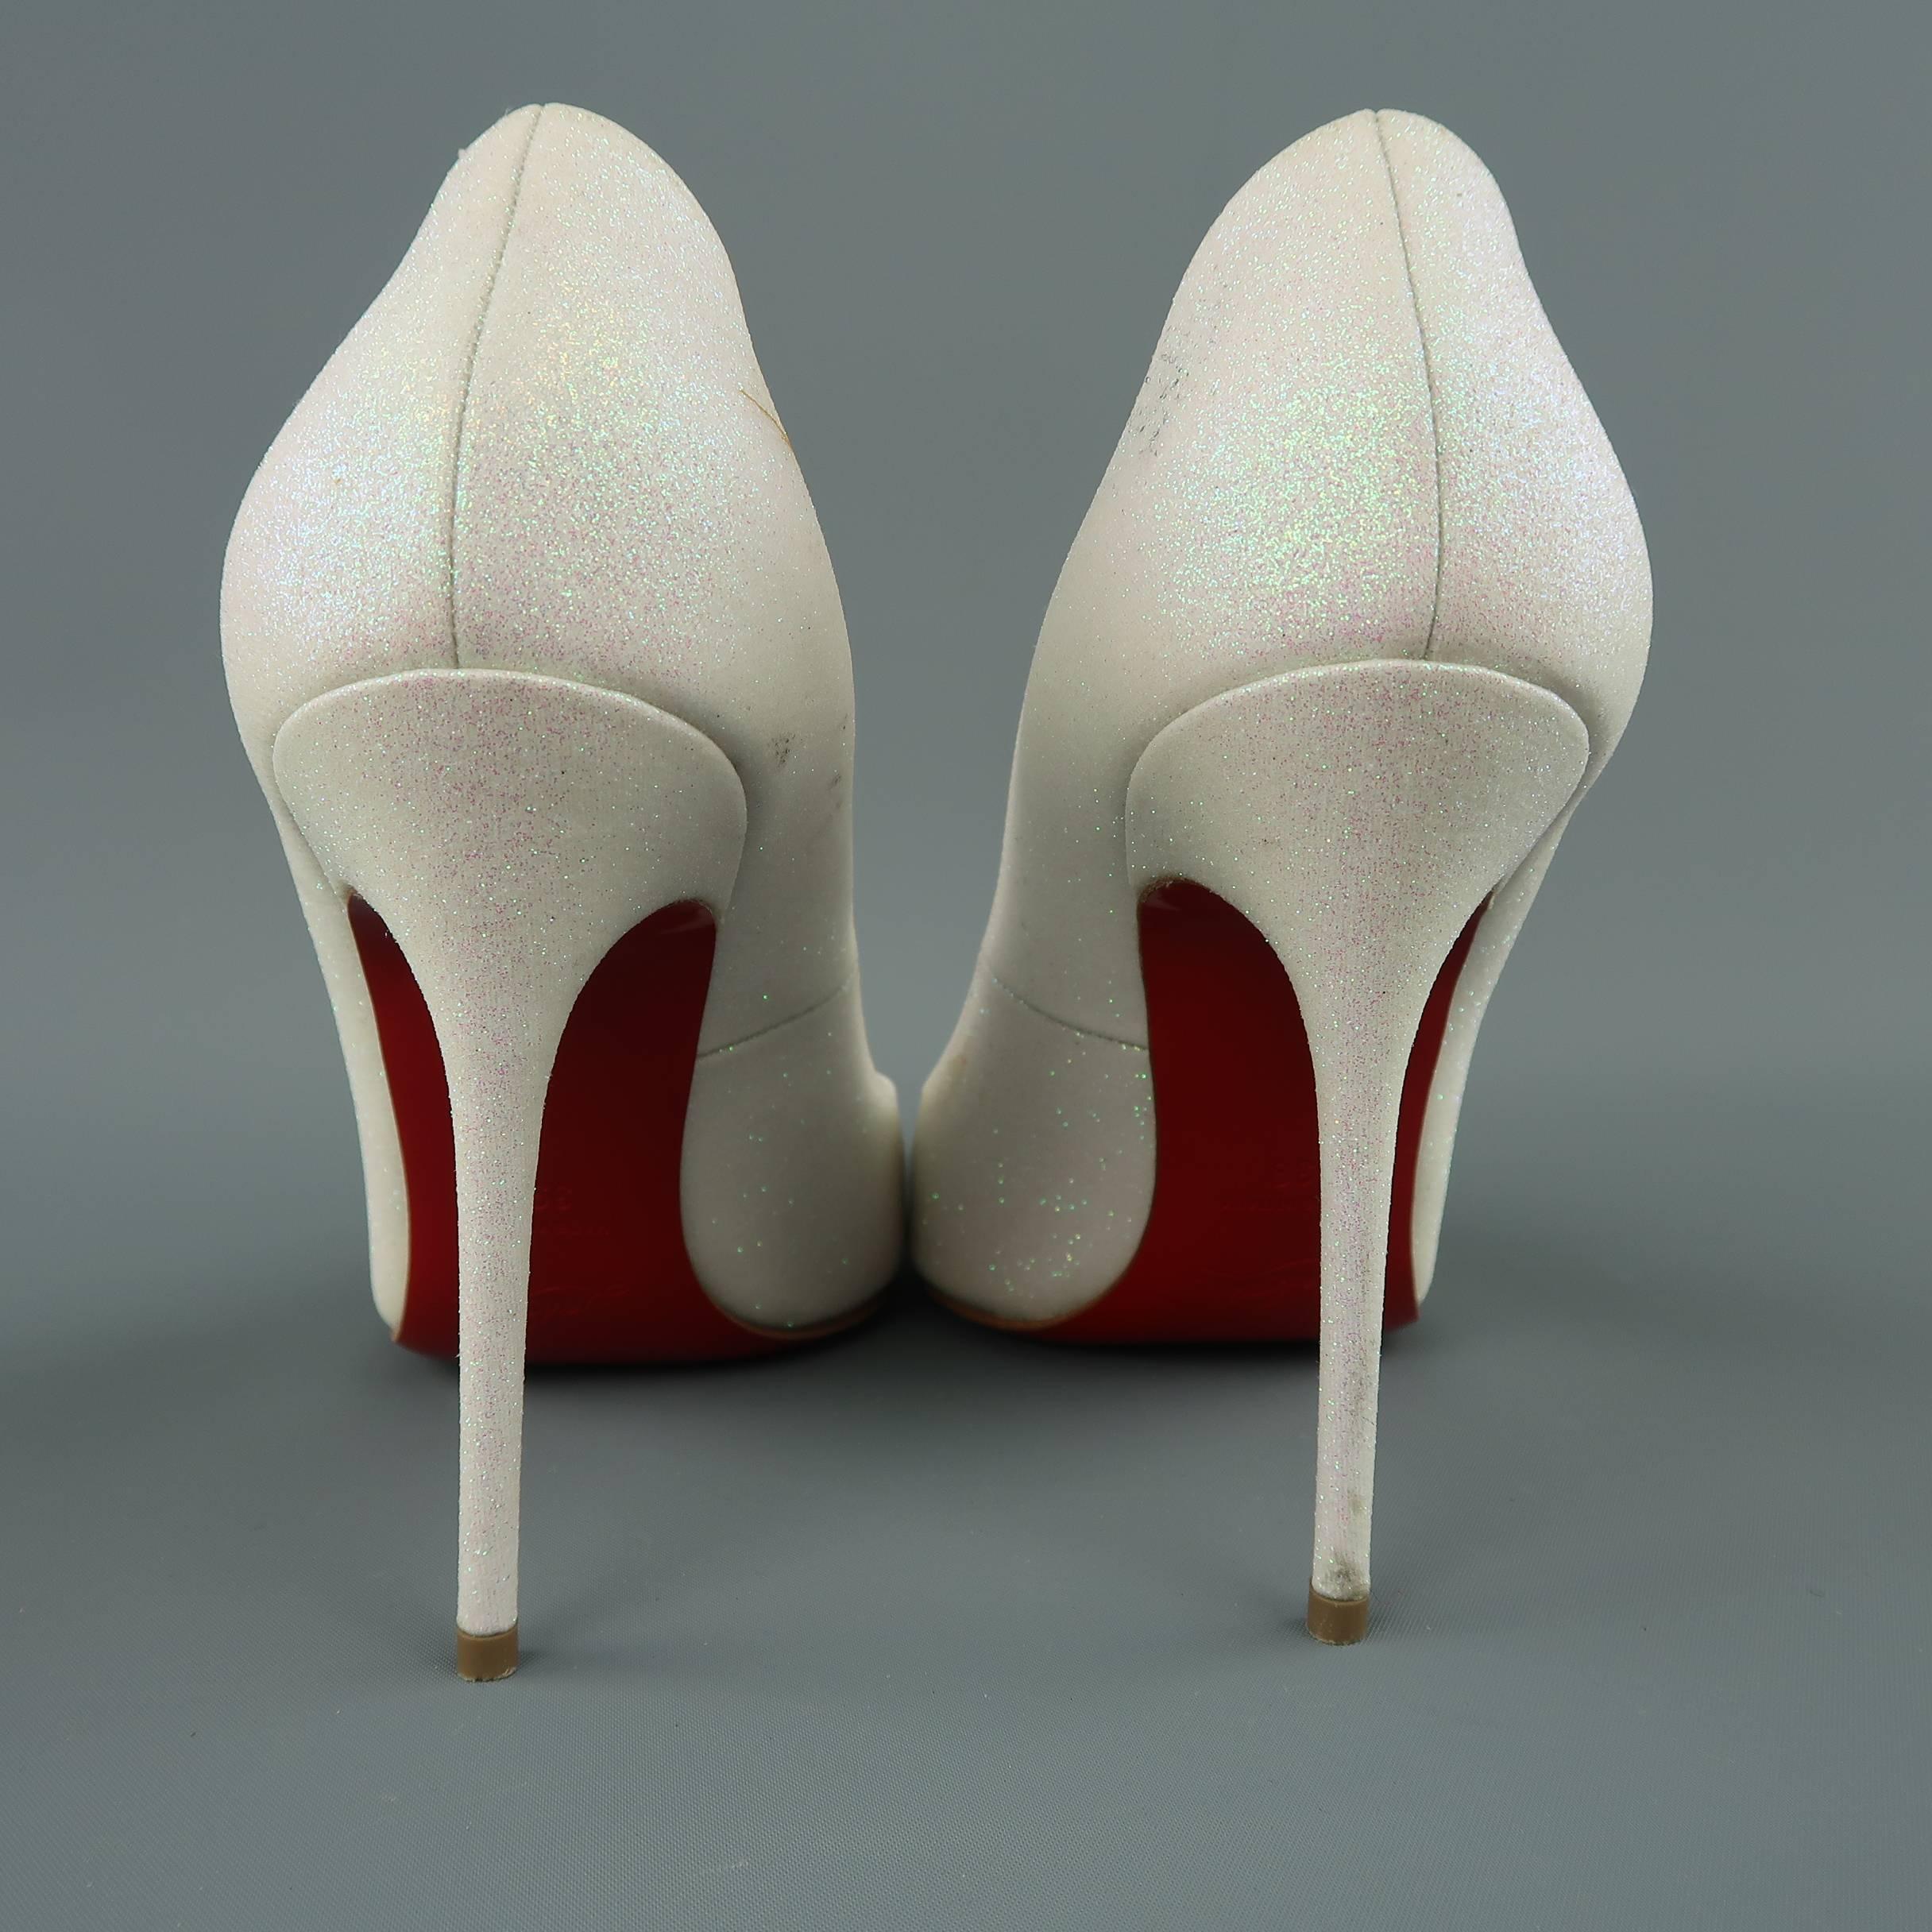 CHRISTIAN LOUBOUTIN 9 Ivory Iridescent Glitter Leather Pigalle Follies Pumps 2